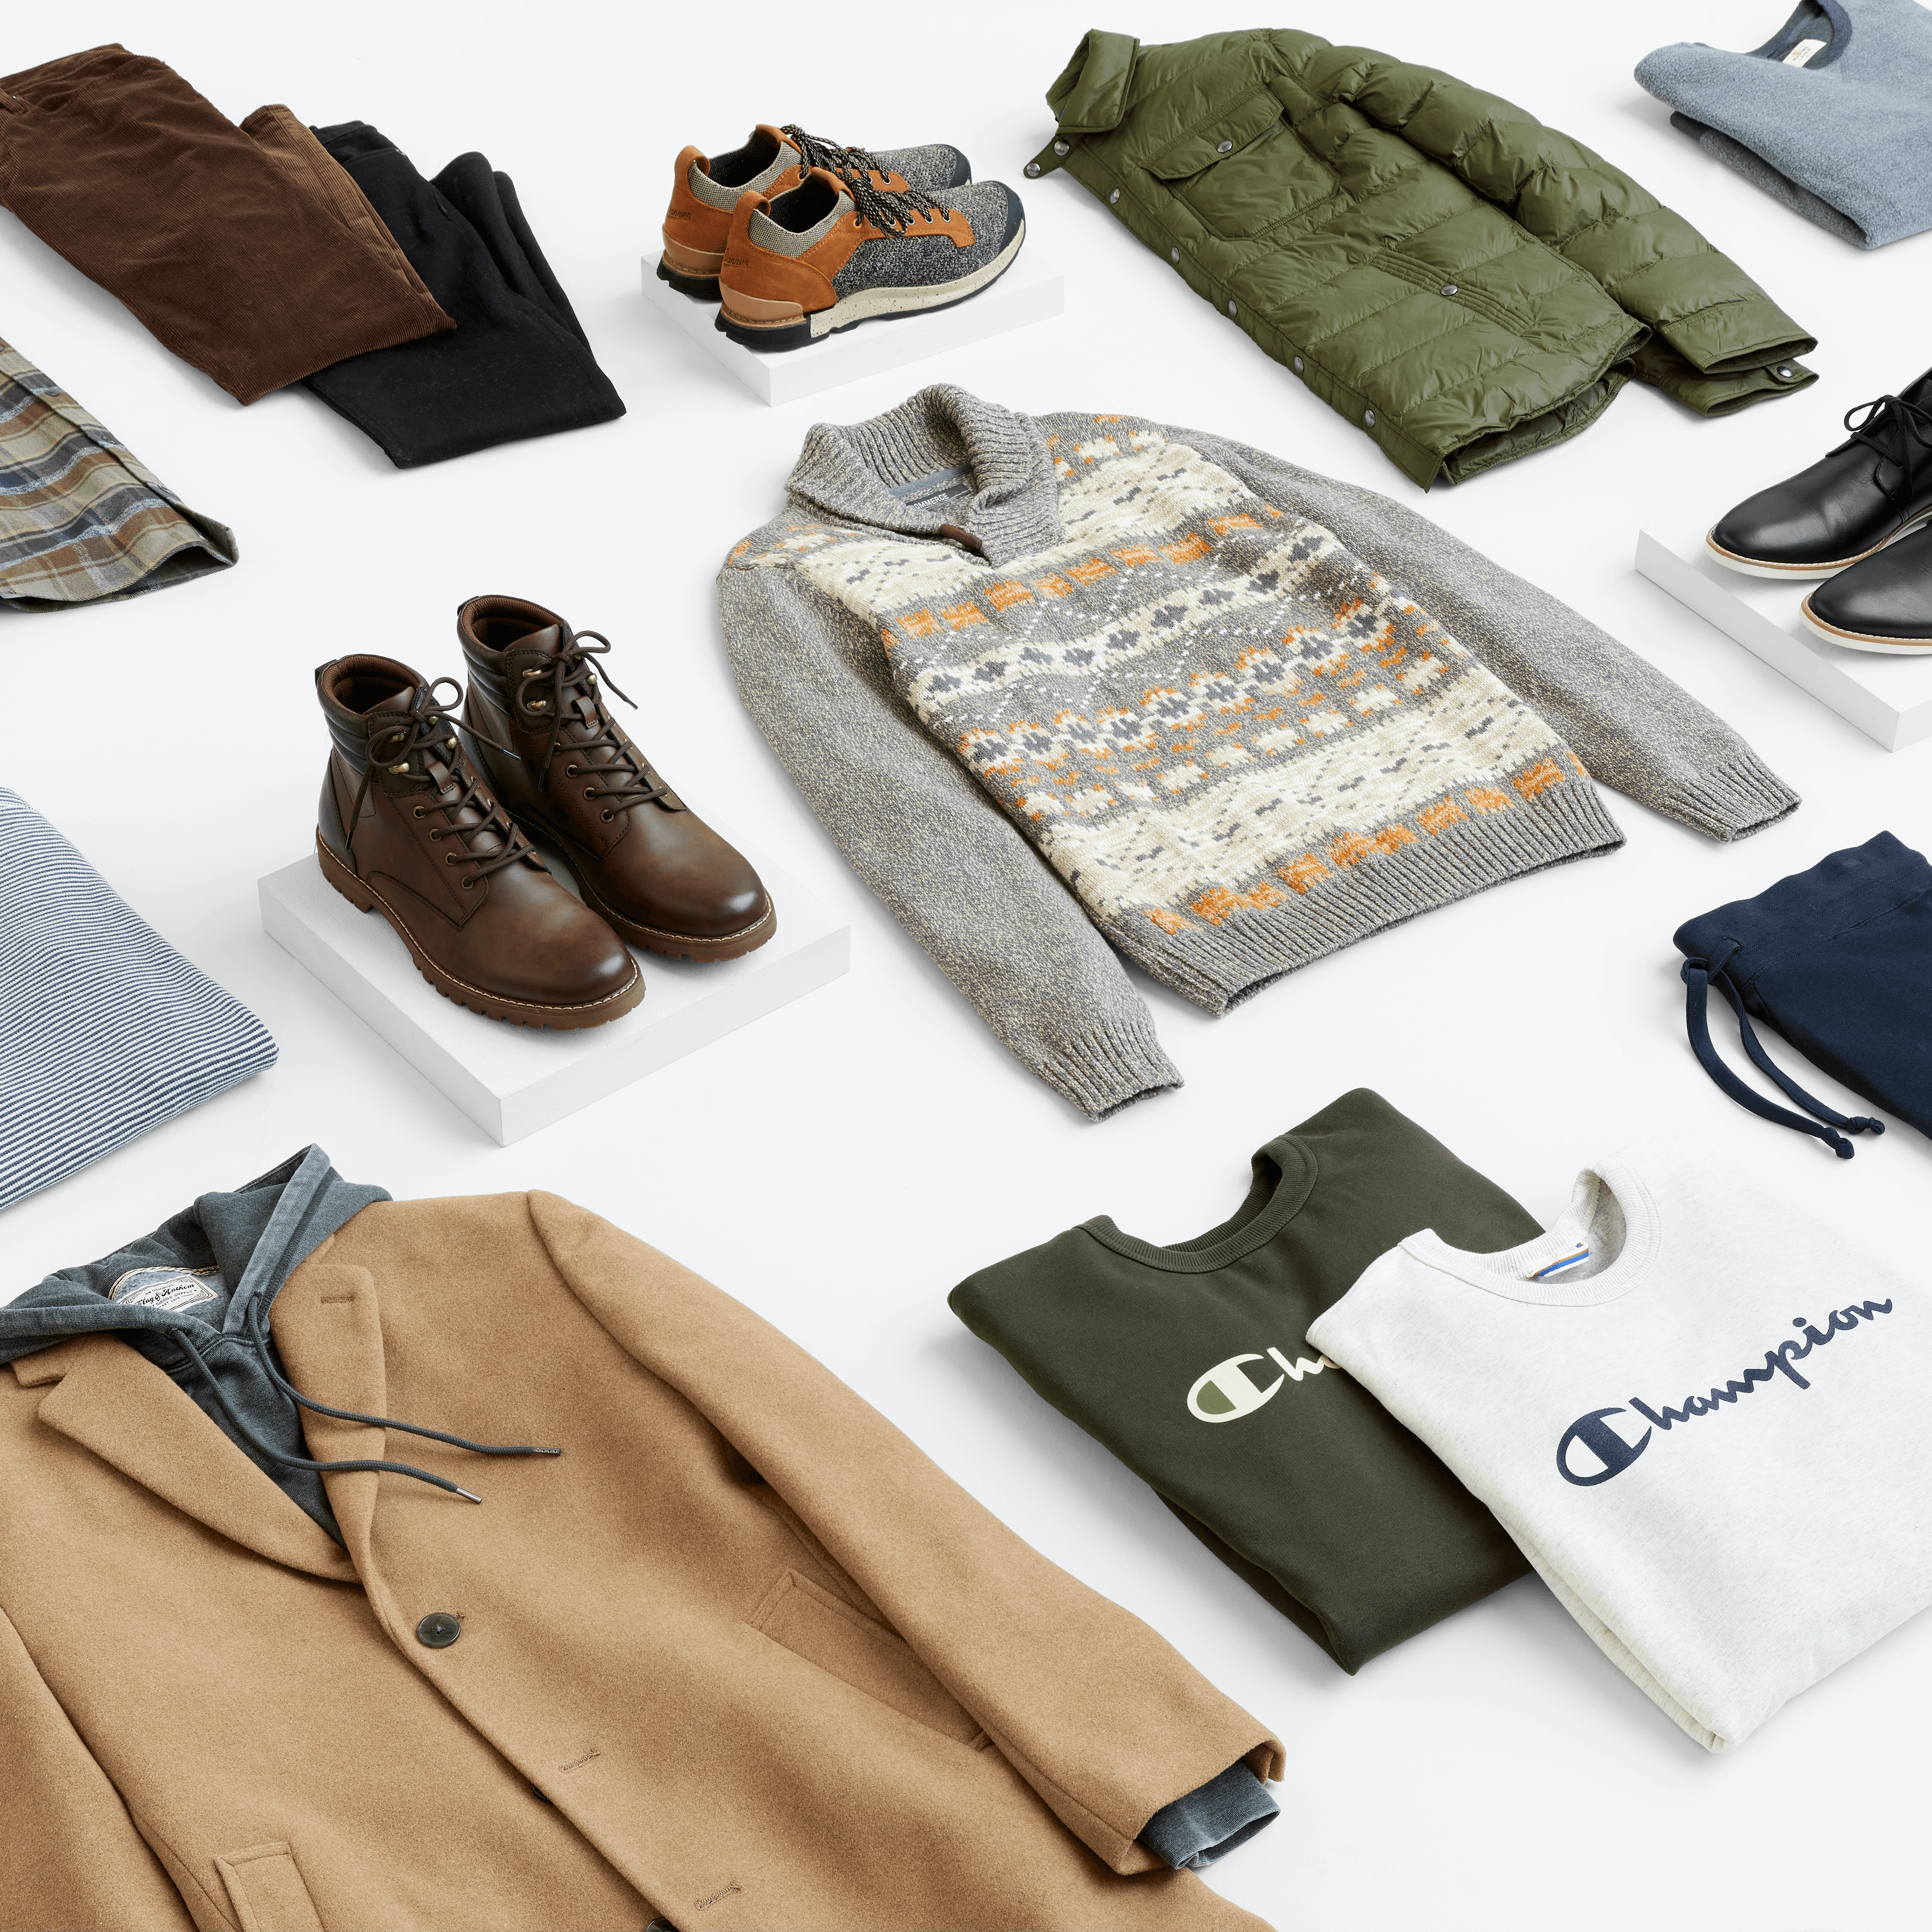 Men's fall fashion trends range from athletic to Nordic, Fashion